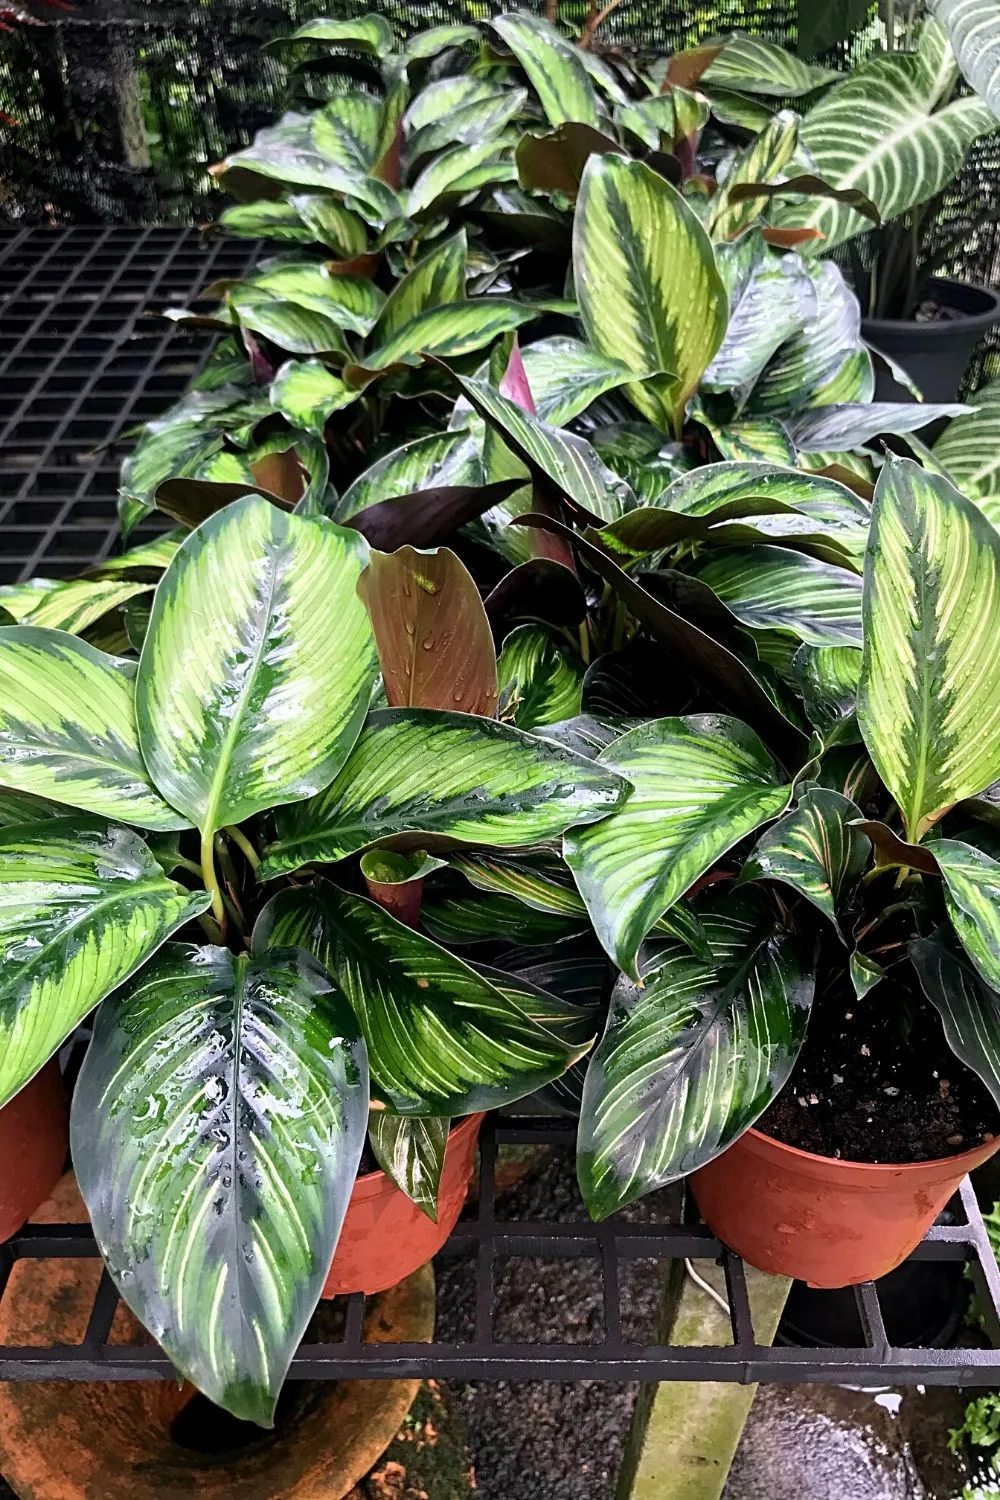 Pinstripe calathea is one of the plants that has an easy-to-care for temperament among northeast-facing window plants